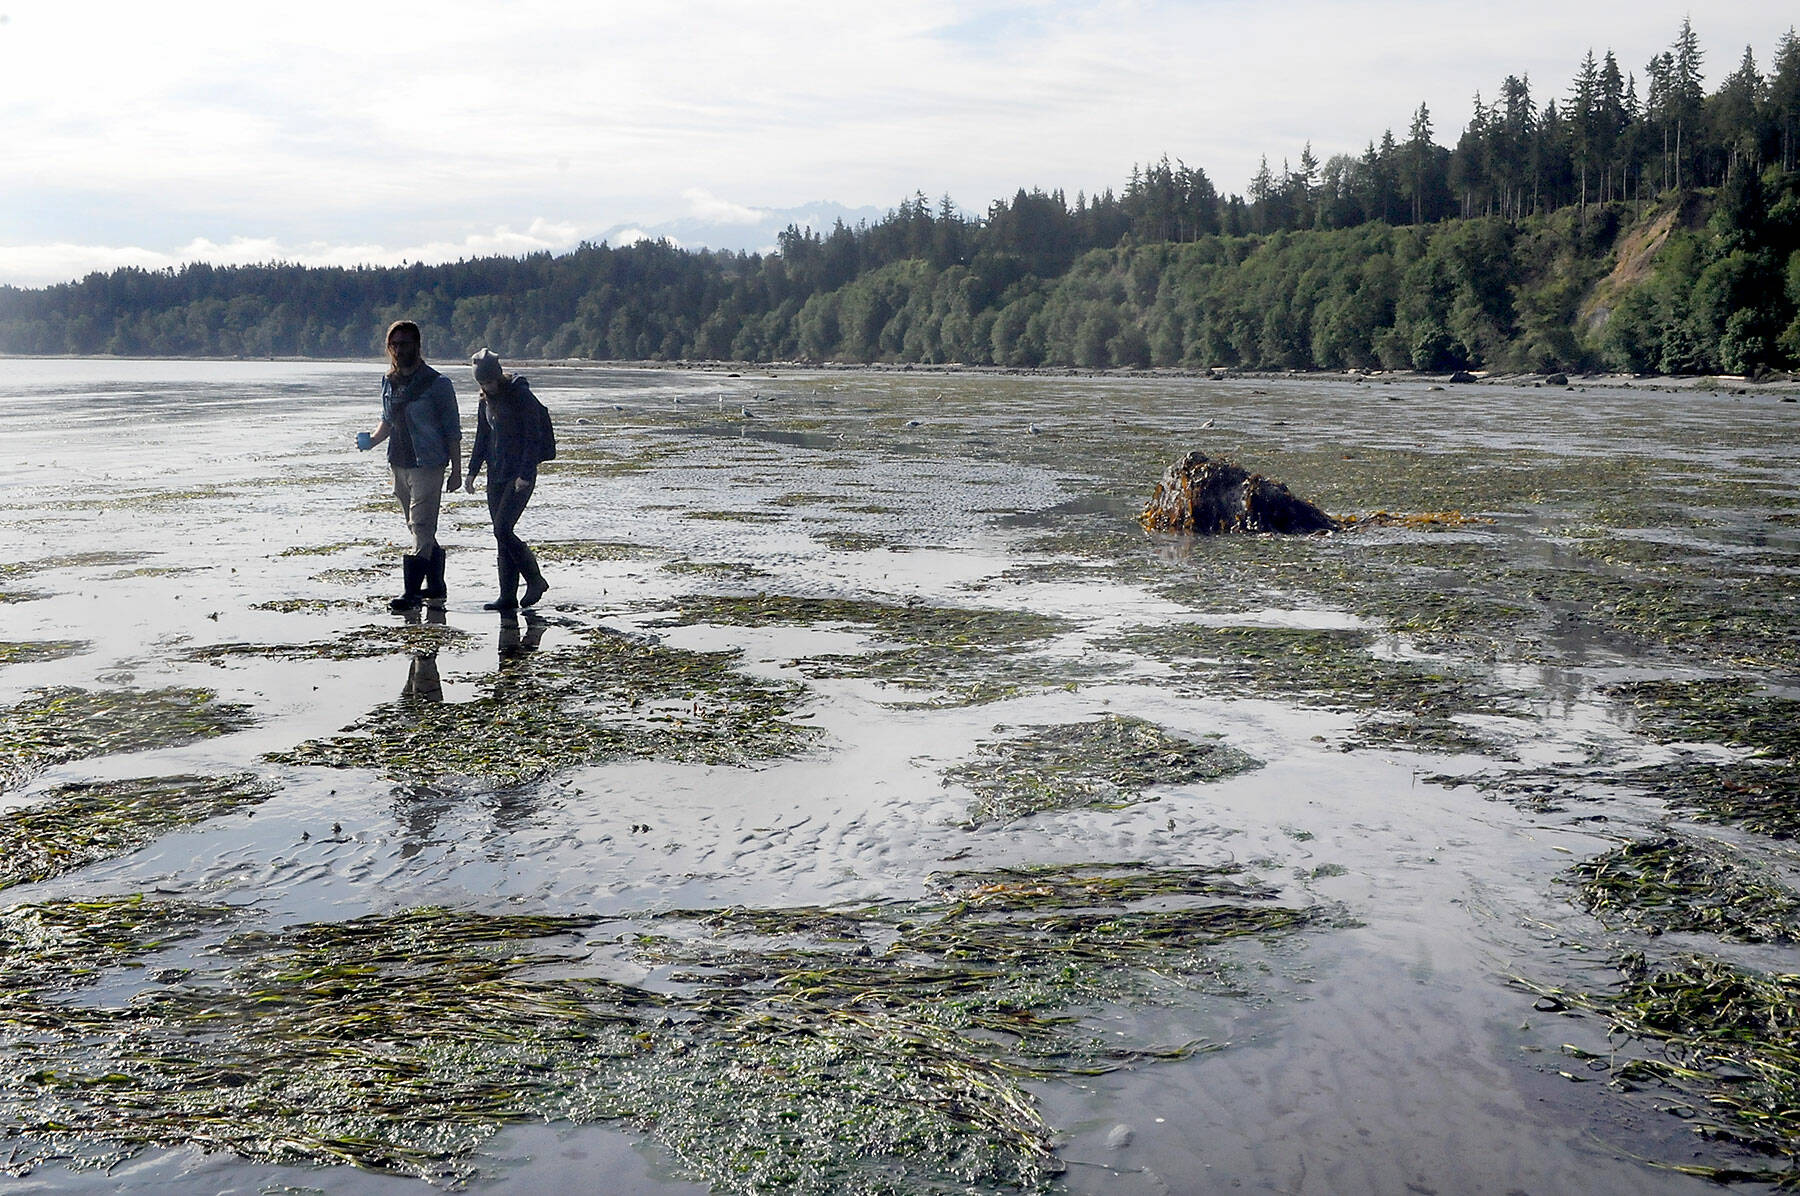 Curtis Welcker of Freshwater Bay and Amy Joy Sedberry of Port Angeles walk along the tidal flats at Freshwater Bay County Park west of Port Angeles during Wednesday’s lowest tide of the year at -2.62 feet. (Keith Thorpe/Peninsula Daily News)